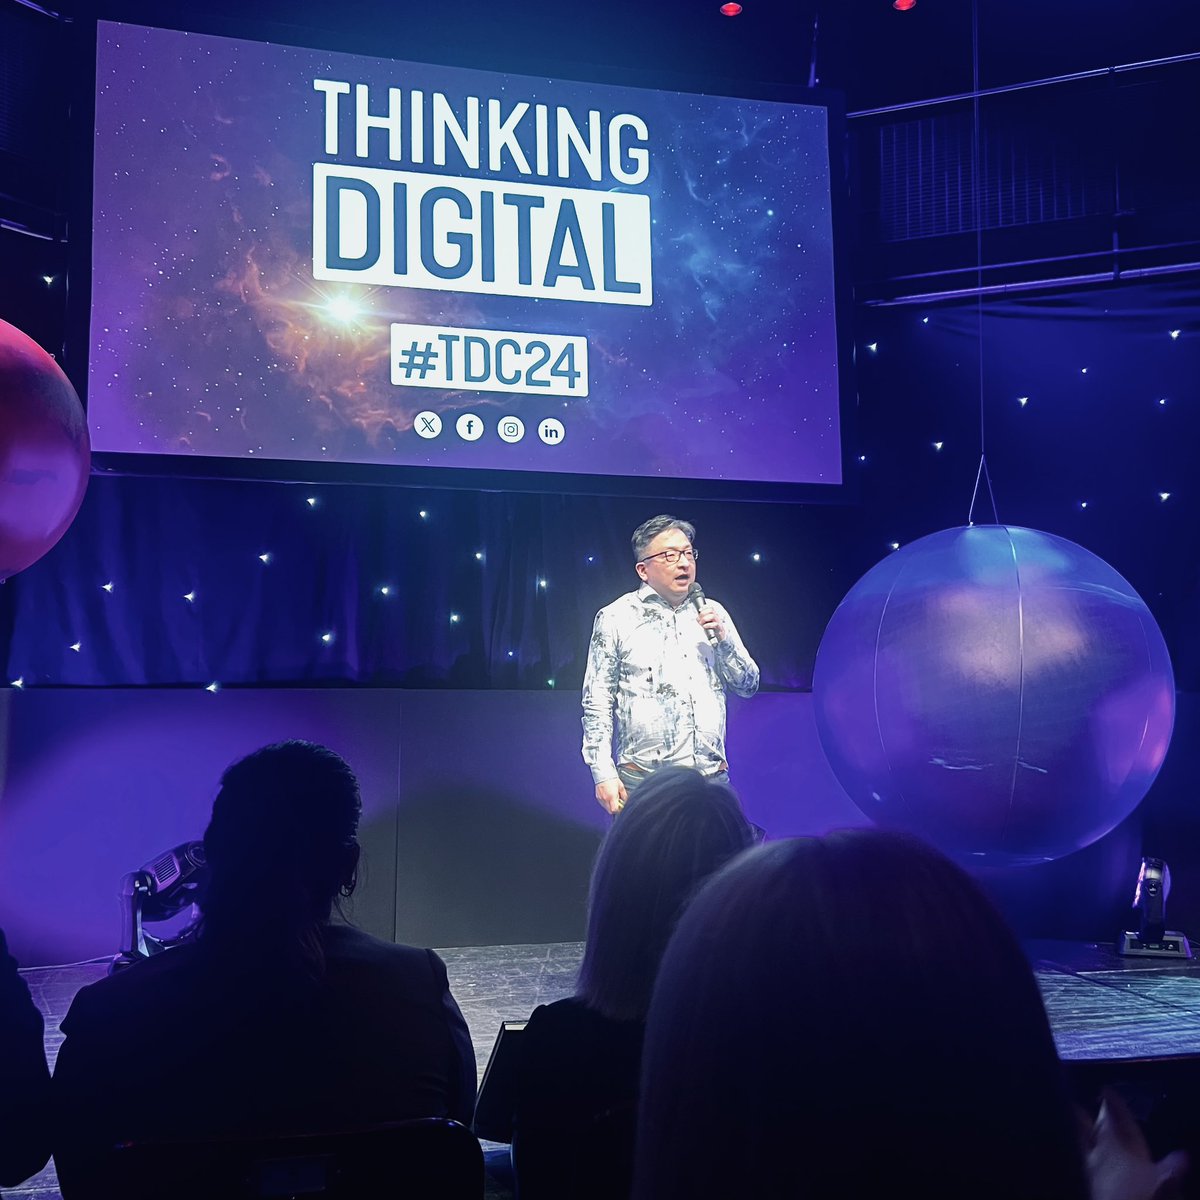 Sex toys, startups, and NUFC… only at @ThinkingDigital 🤷🏻‍♂️ Massive thank you to @herbkim and the team for an amazing two days 🙌 #NETech